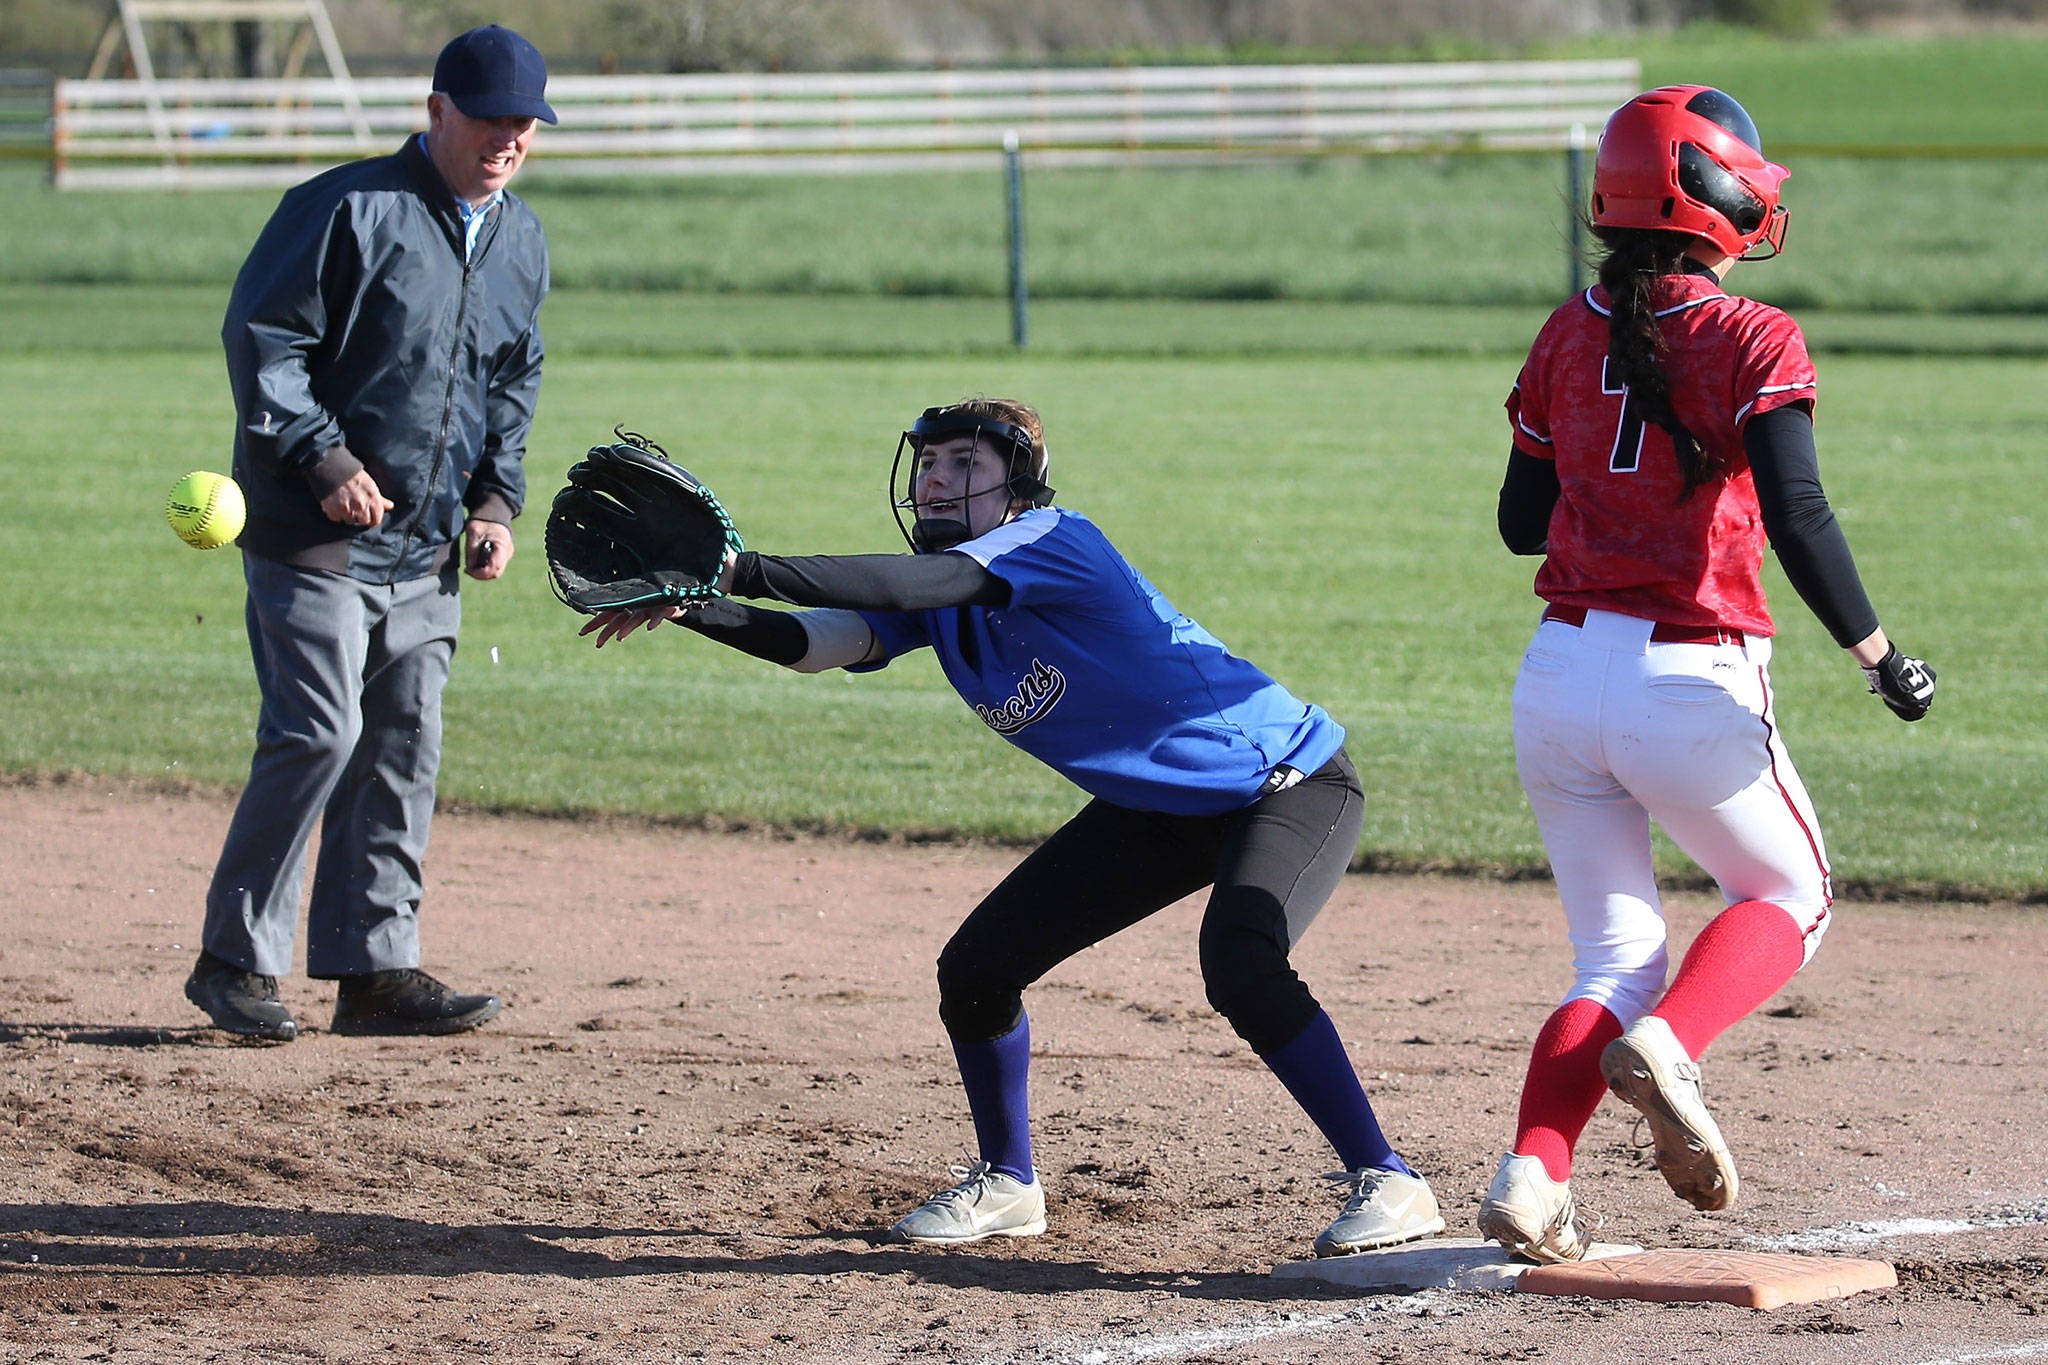 Coupeville’s Scout Smith (7) reaches first base before South Whidbey’s Melody Wilkie makes the catch as umpire Randy James looks on.(Photo by John Fisken)